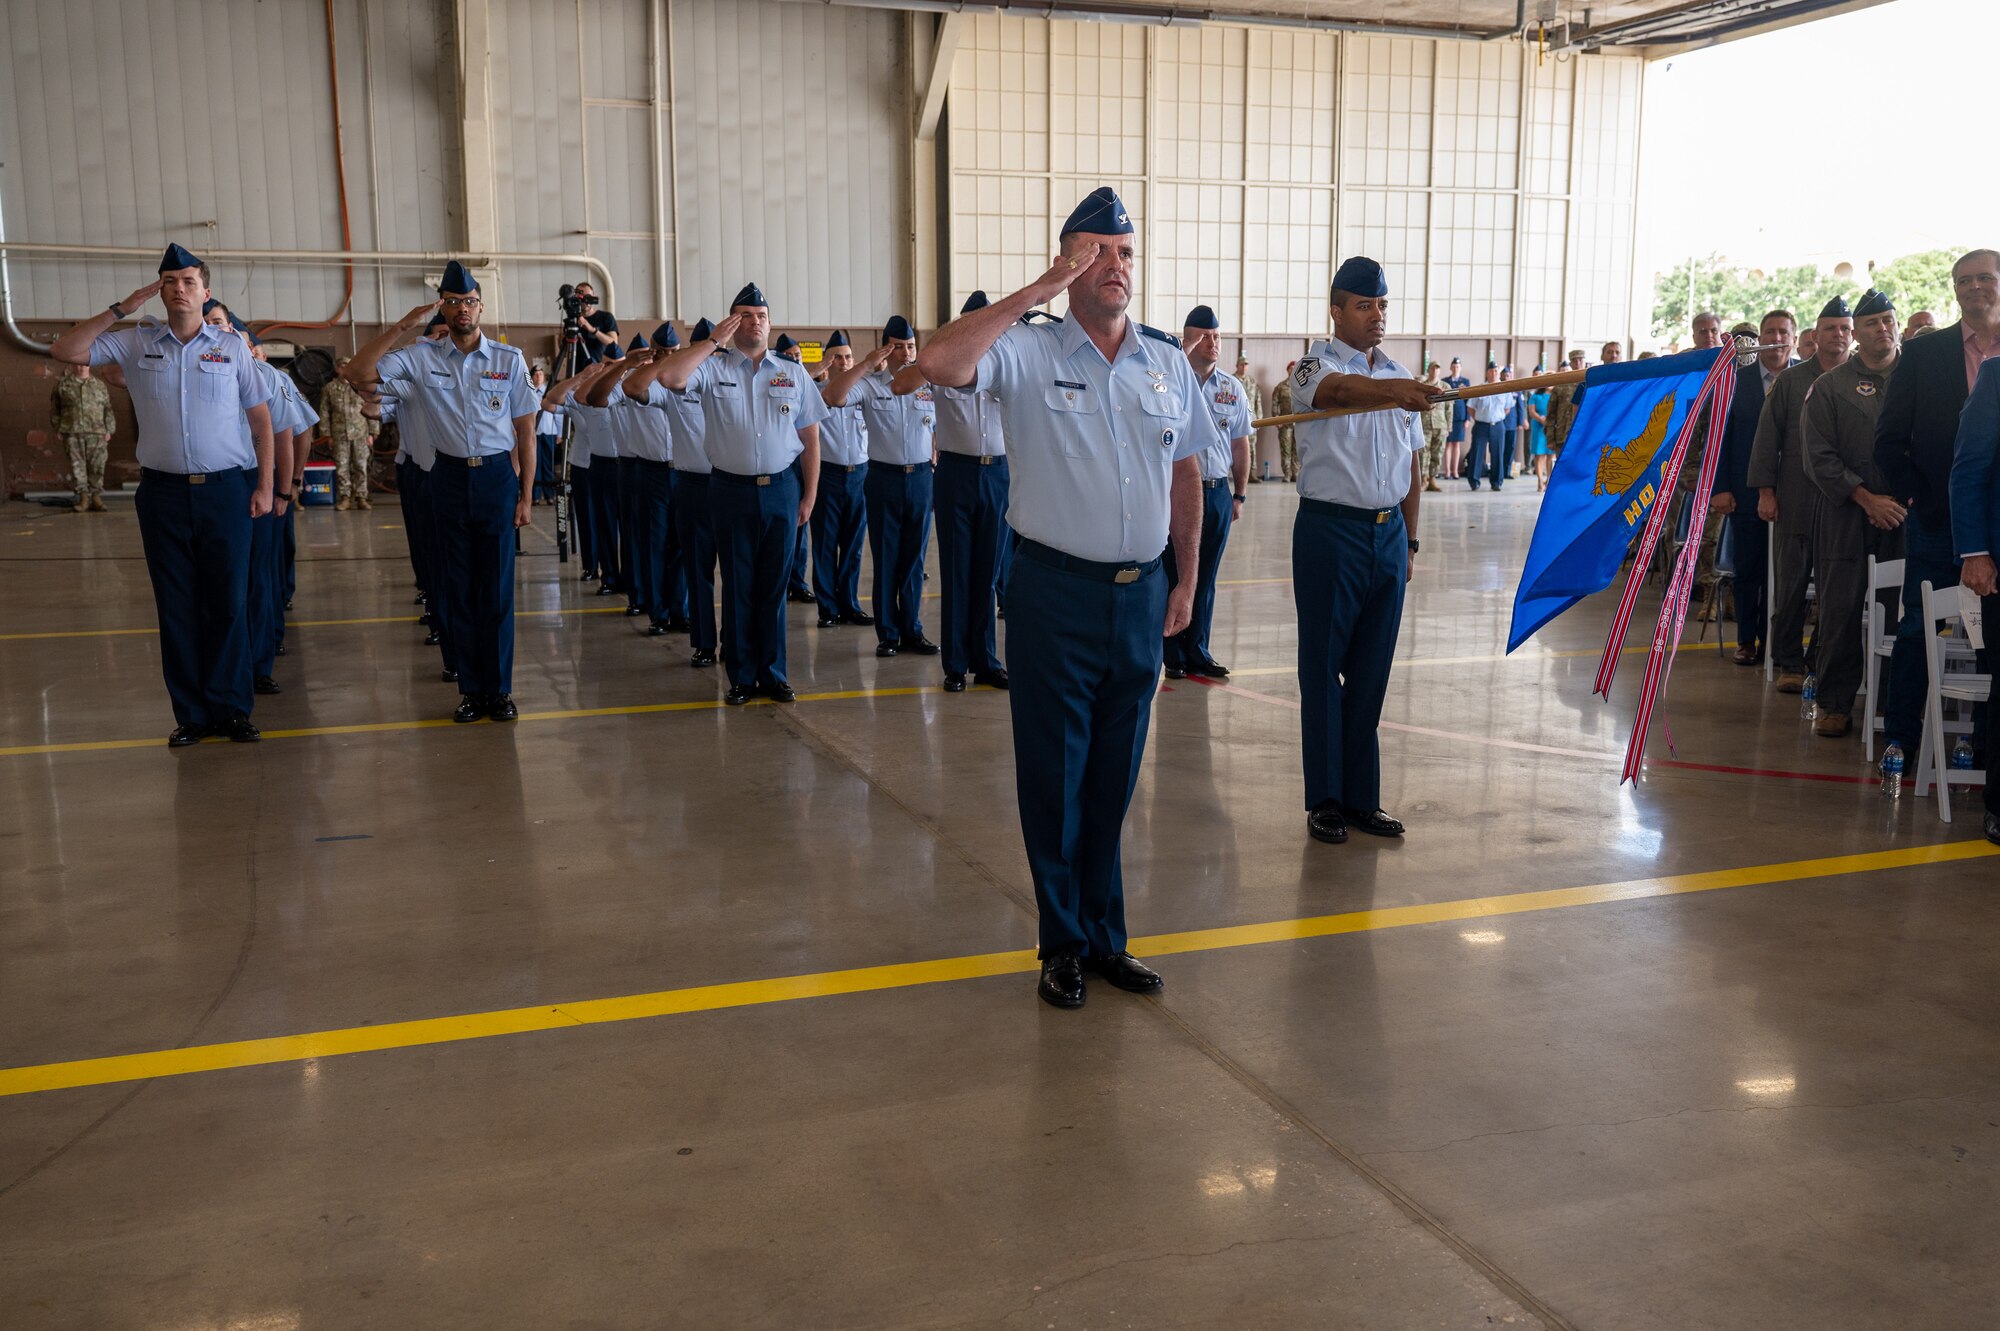 U.S. Air Force Col. Layne Trosper, plans and resources division chief, Air Force Recruiting Service, leads the AFRS flight first salute to new commander Brig. Gen. Christopher Amrhein after his assumption of AFRS command at Joint Base San Antonio-Randolph June 2, 2022